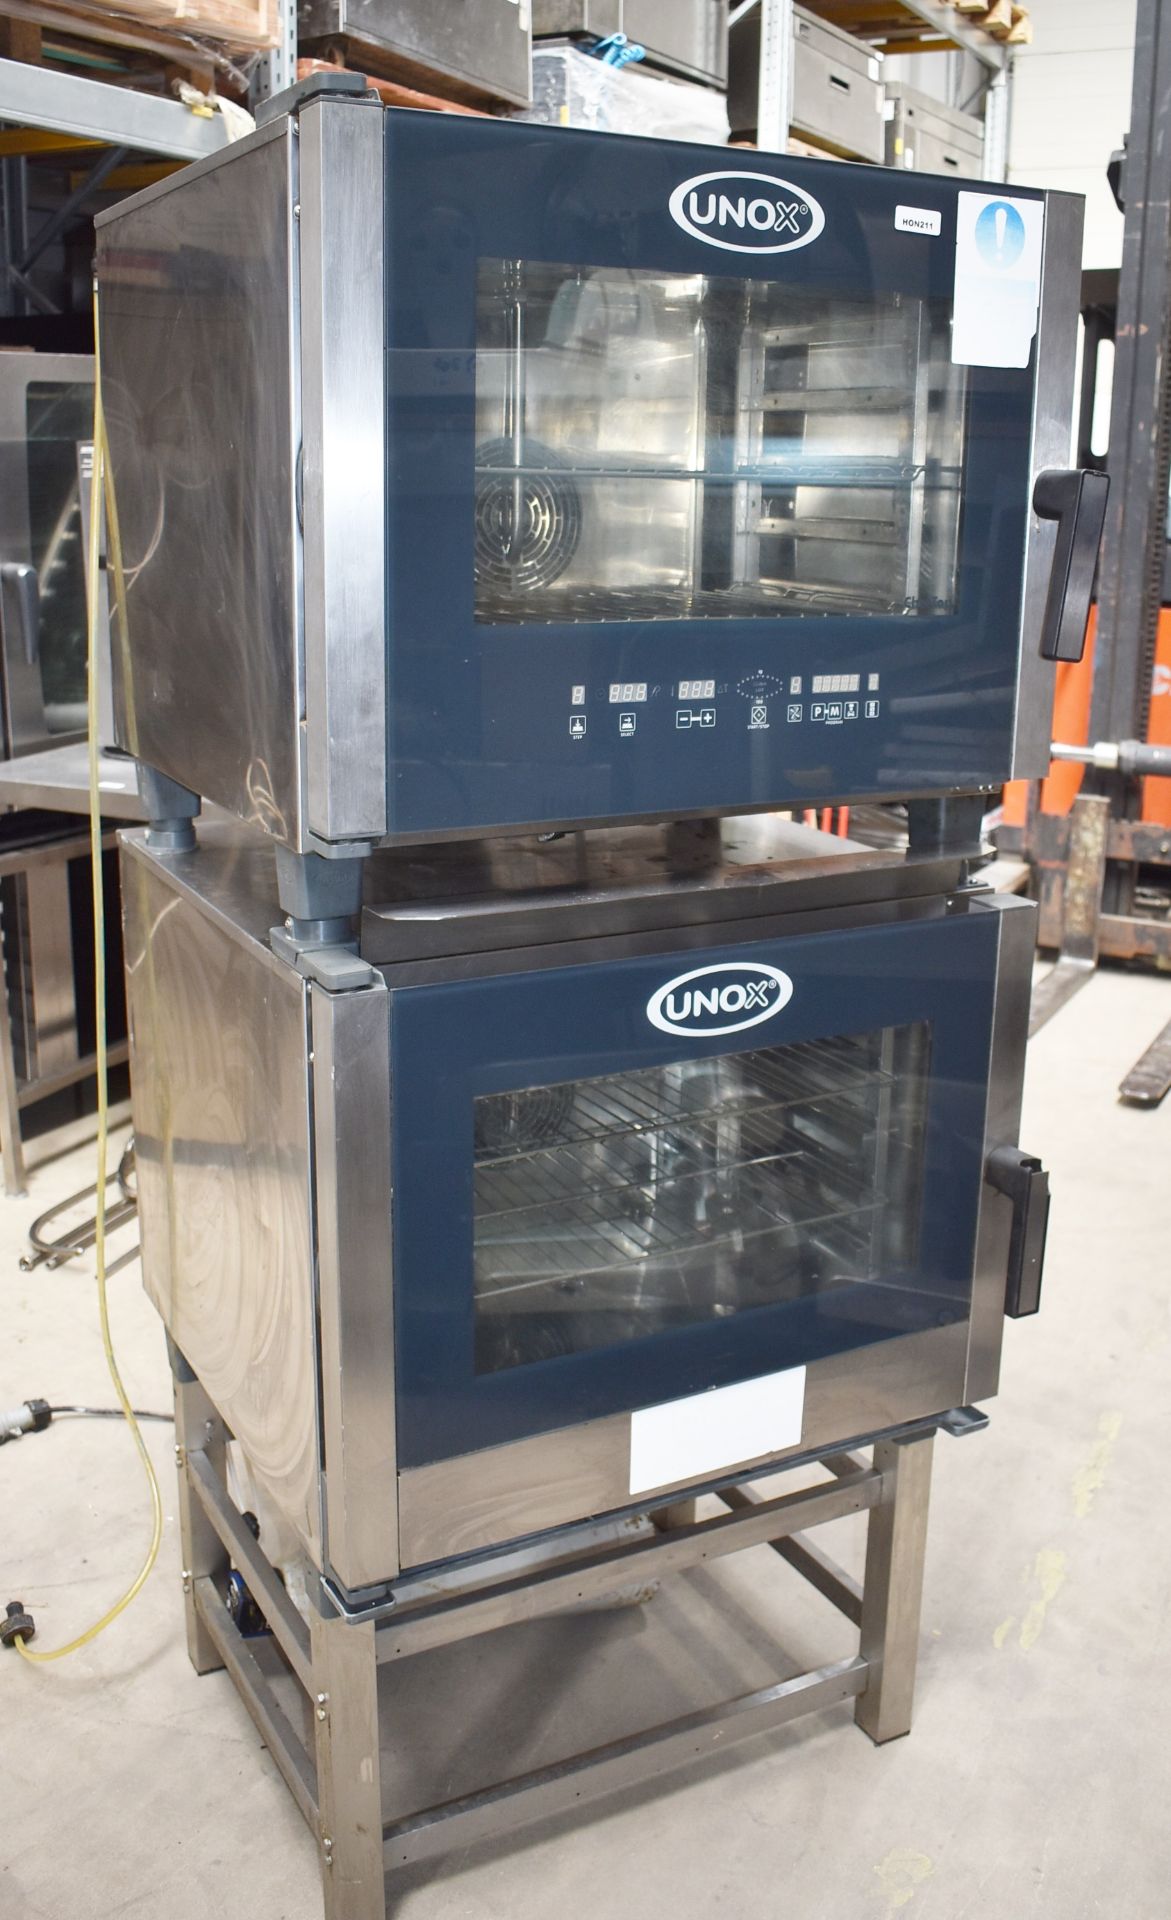 1 x Unox ChefTop XVL385 Commercial 3 Phase Double Oven For Slow Cooking Meats, Proving Dough & More - Image 24 of 26